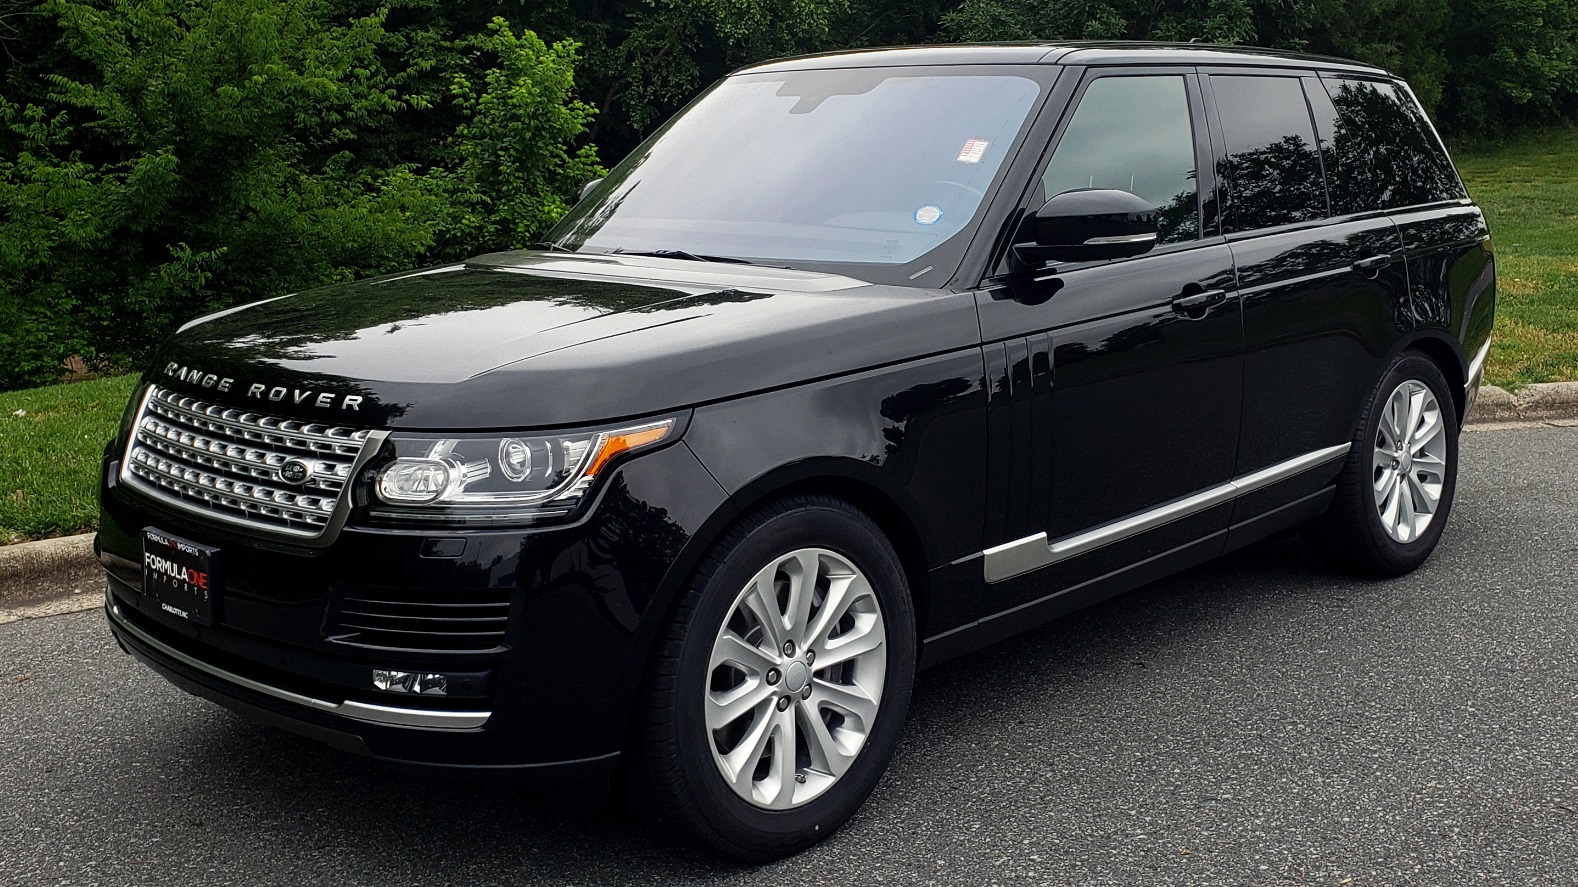 Used 2016 Land Rover RANGE ROVER HSE 3.0L / NAV / PANO / VENT SEATS / REARVIEW / BLIND SPOT for sale Sold at Formula Imports in Charlotte NC 28227 1